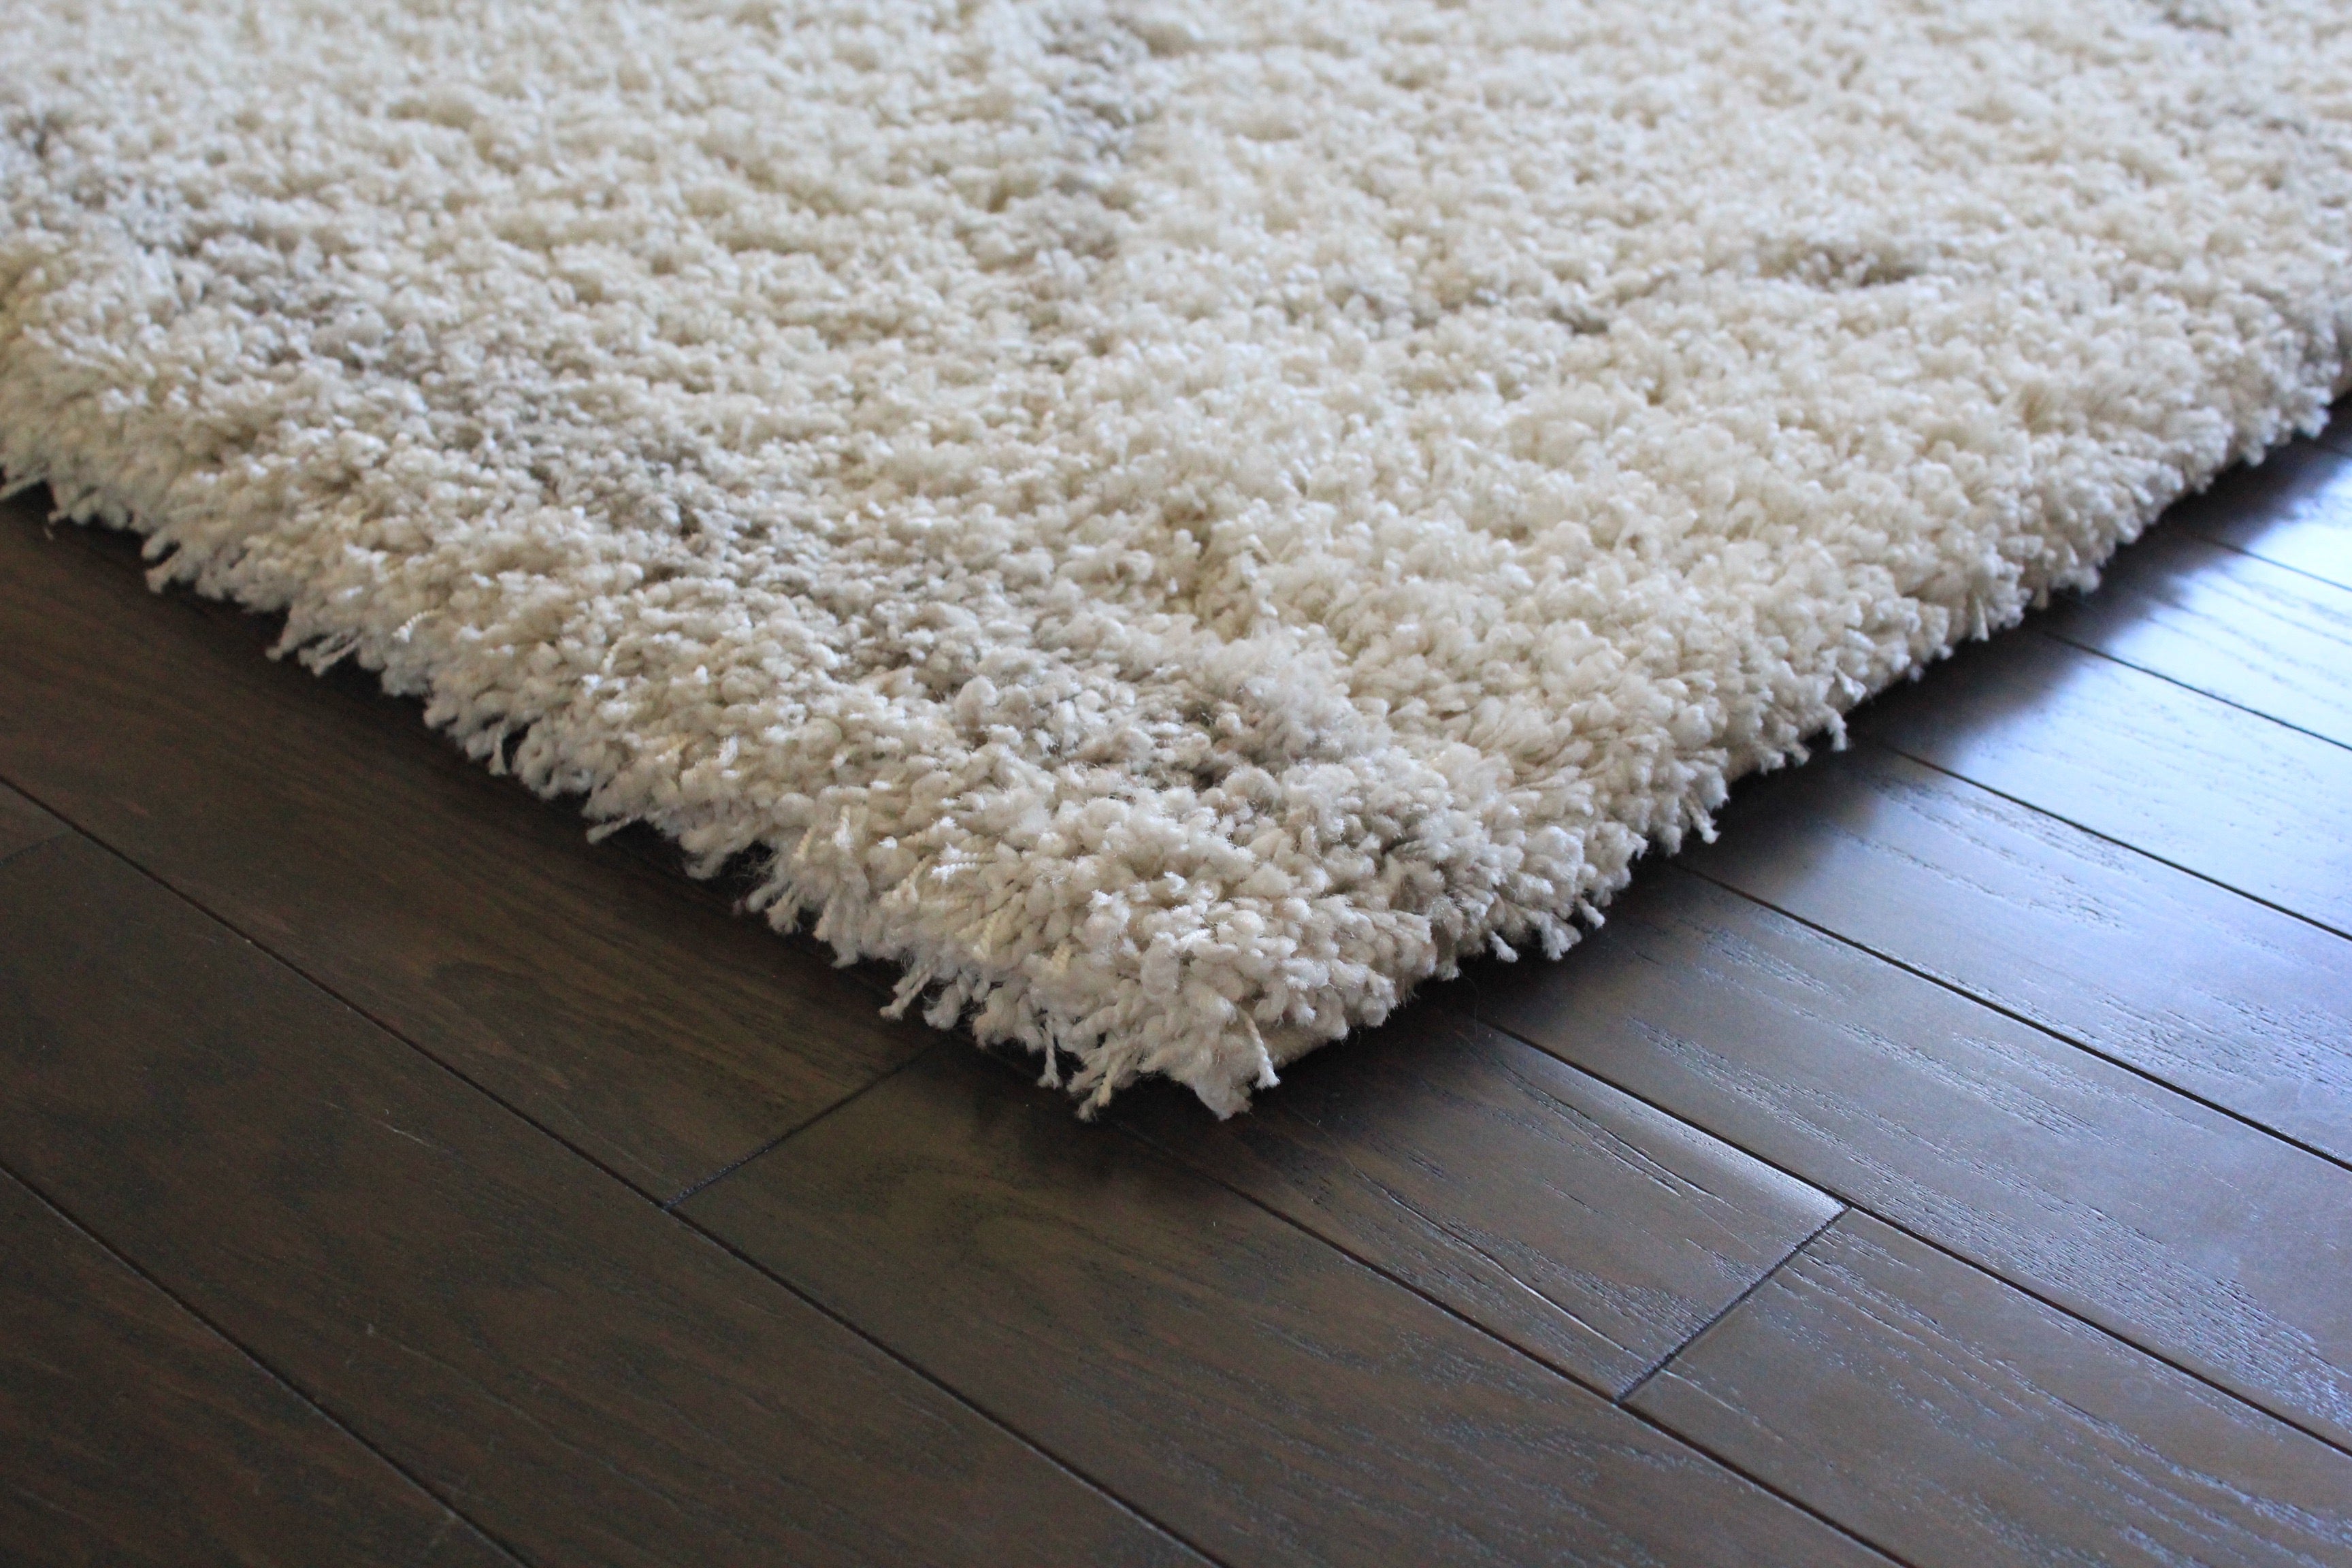 Why Buy an Area Rug Pad